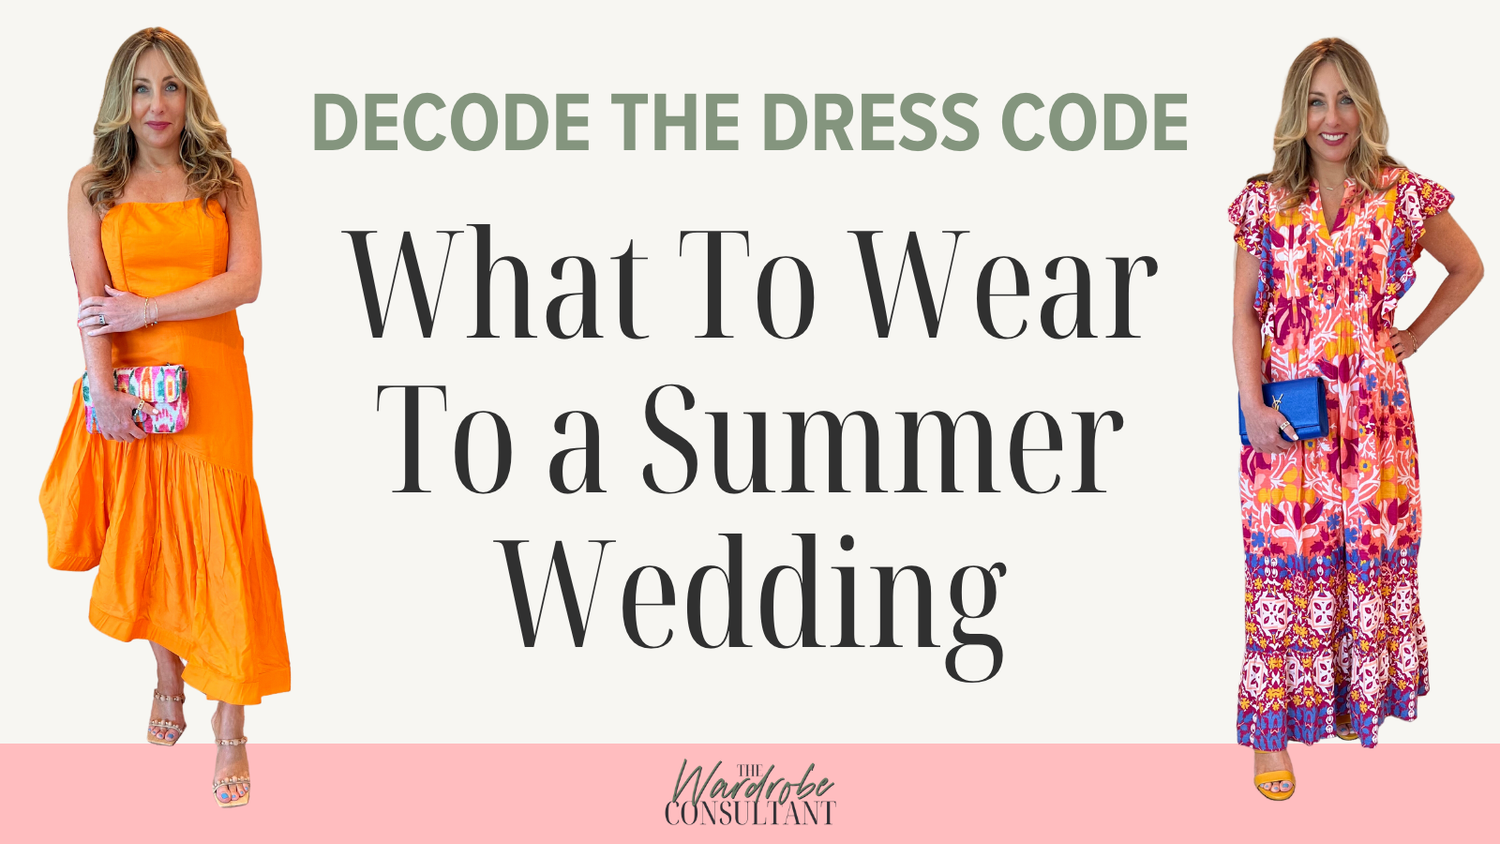 Decoding Dress Codes: A Guide to Formal, Semi-Formal, and Casual